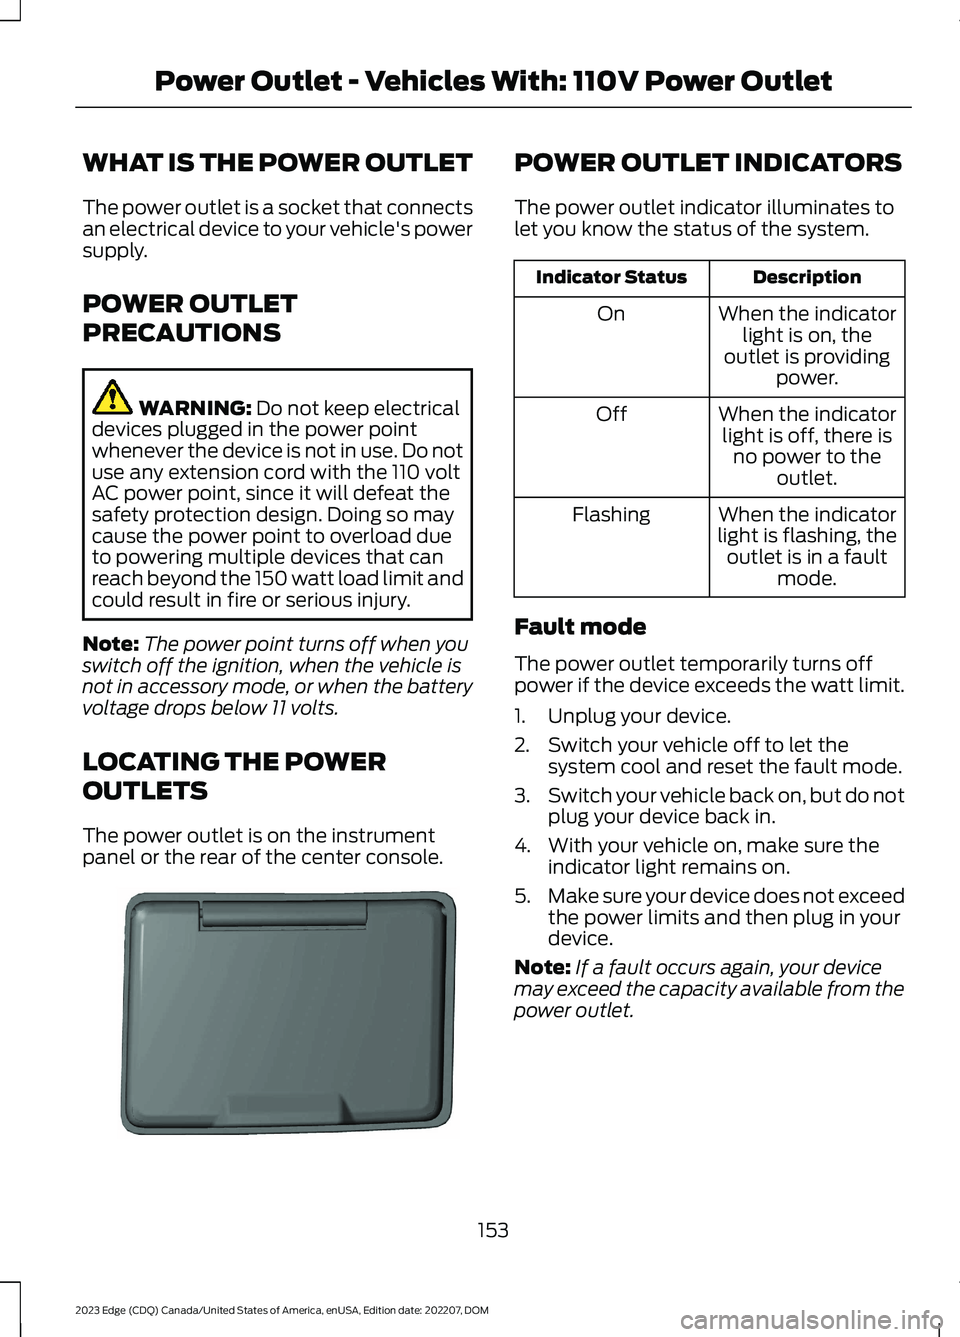 FORD EDGE 2023 User Guide WHAT IS THE POWER OUTLET
The power outlet is a socket that connectsan electrical device to your vehicle's powersupply.
POWER OUTLET
PRECAUTIONS
WARNING: Do not keep electricaldevices plugged in th